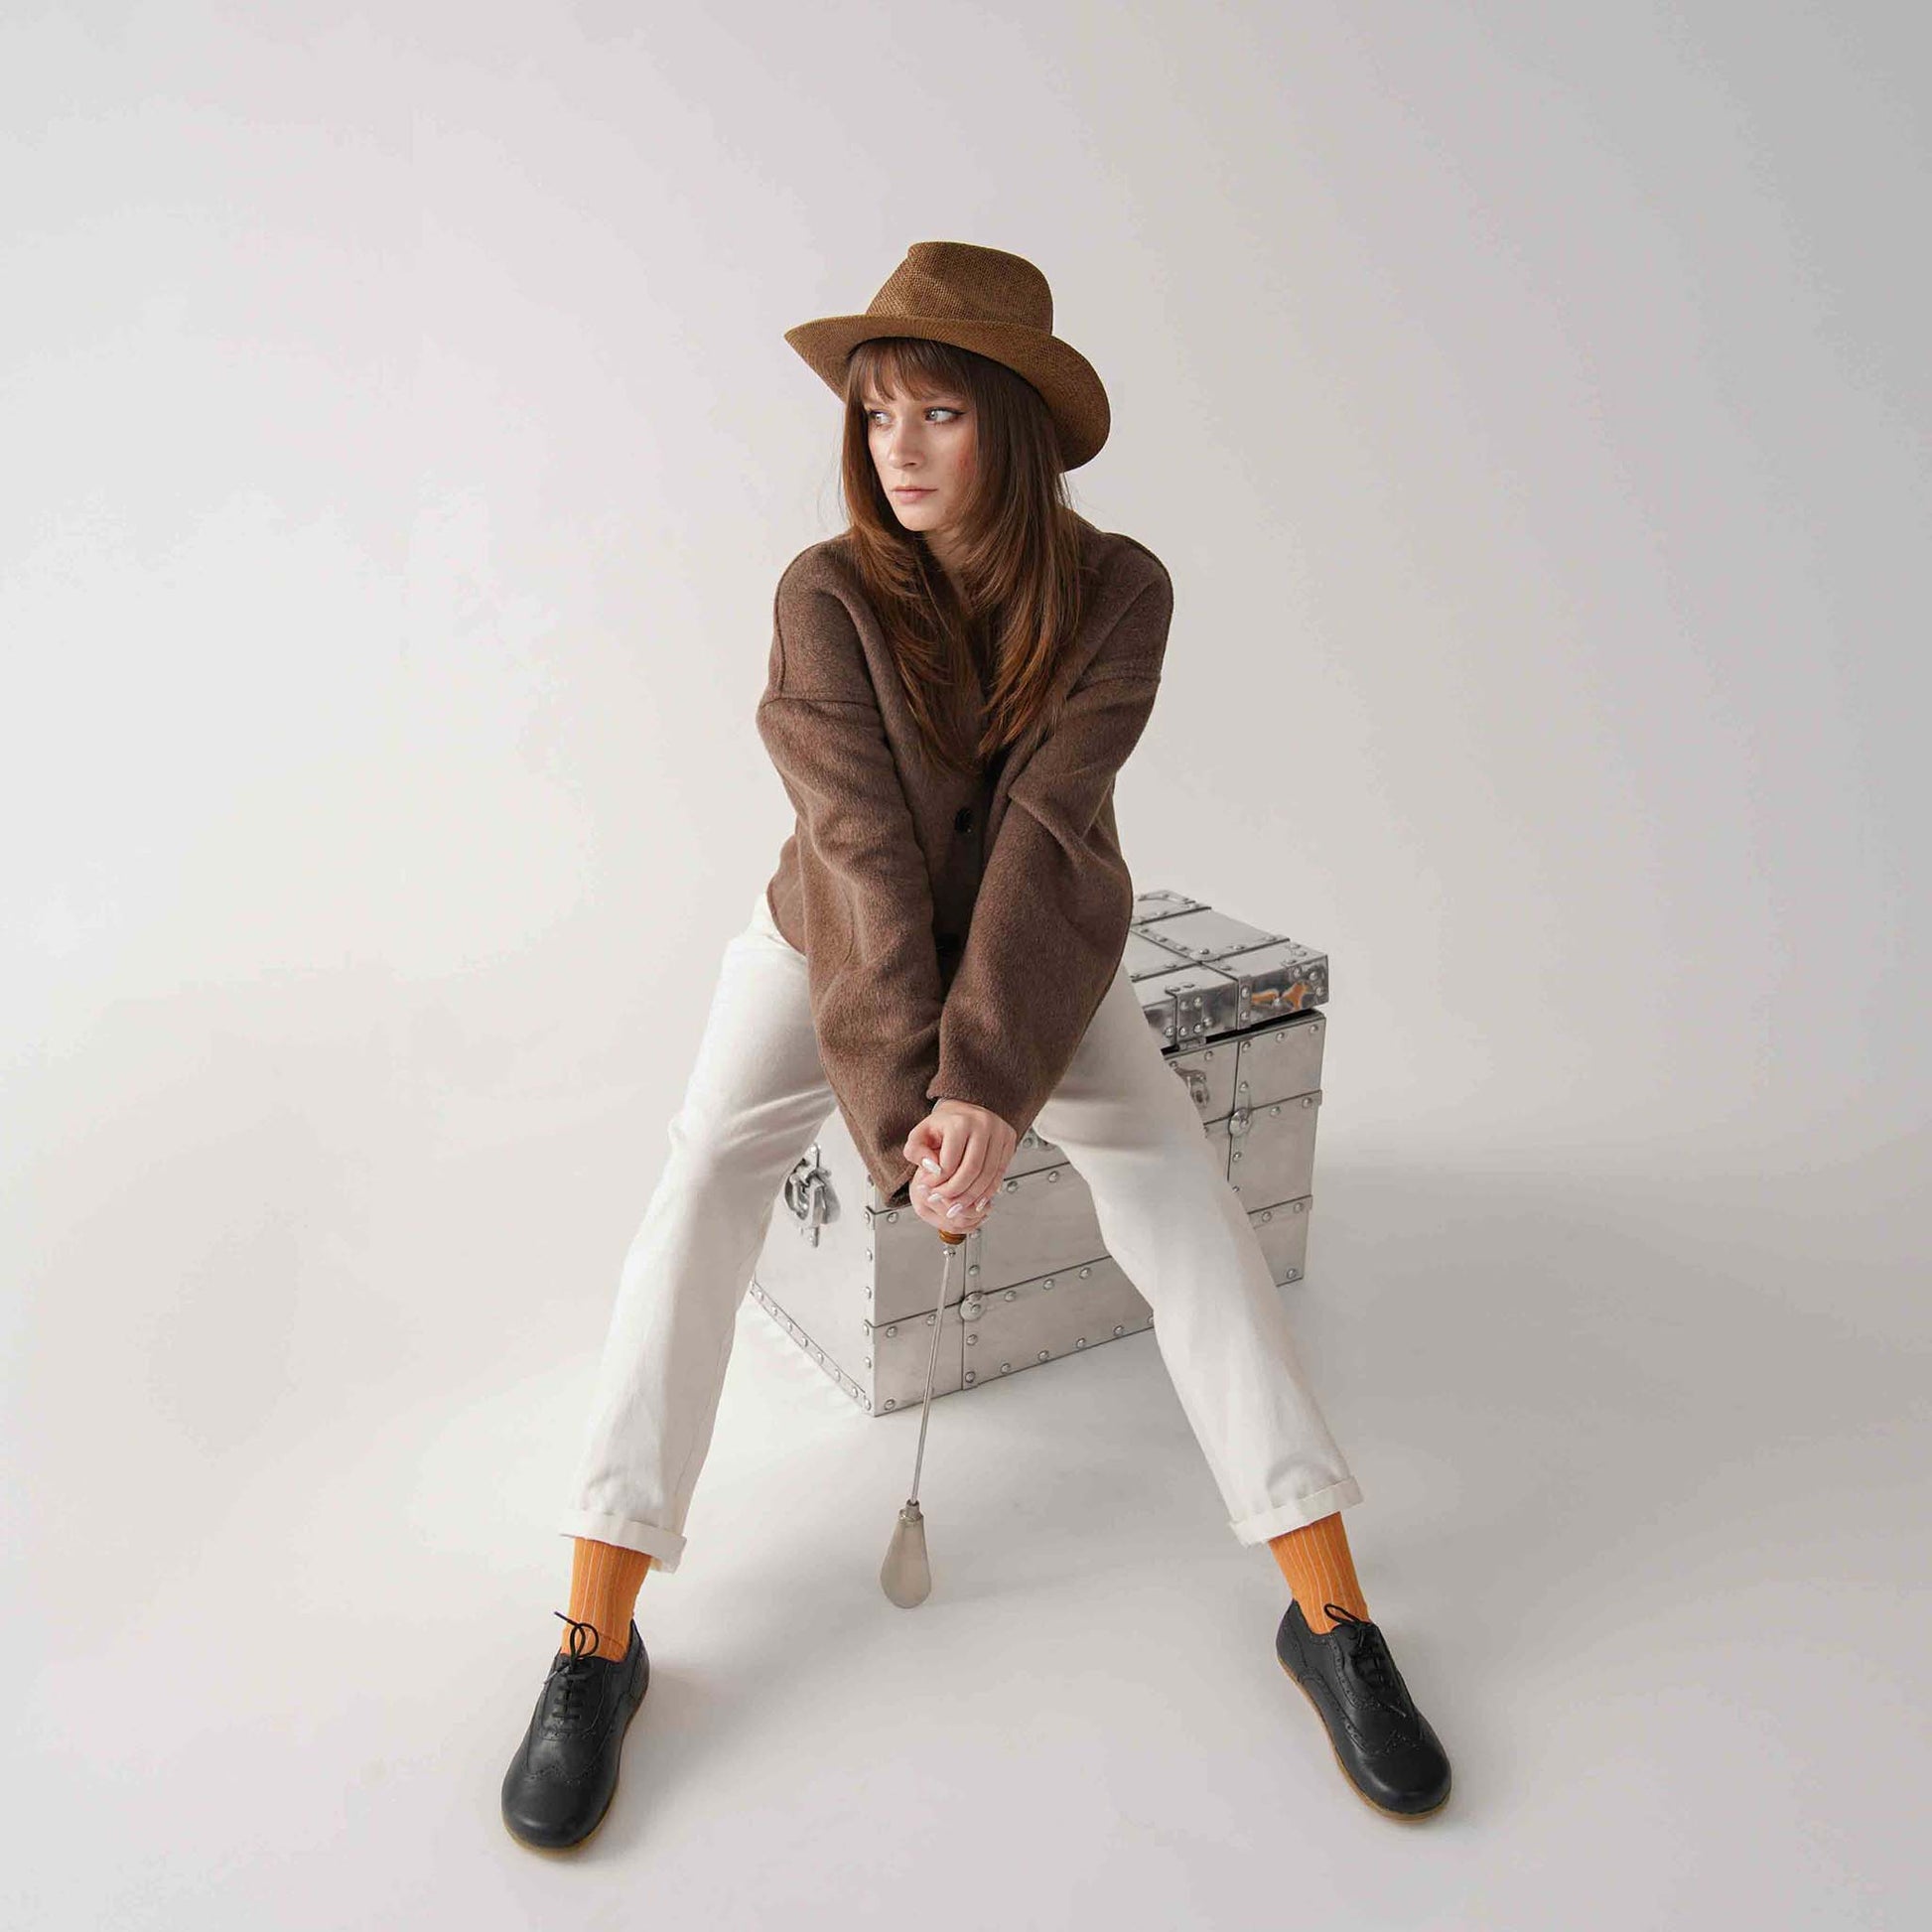 Model wearing black Doris Leather Barefoot Women Oxfords with white pants and a brown coat, sitting on a metallic chest.